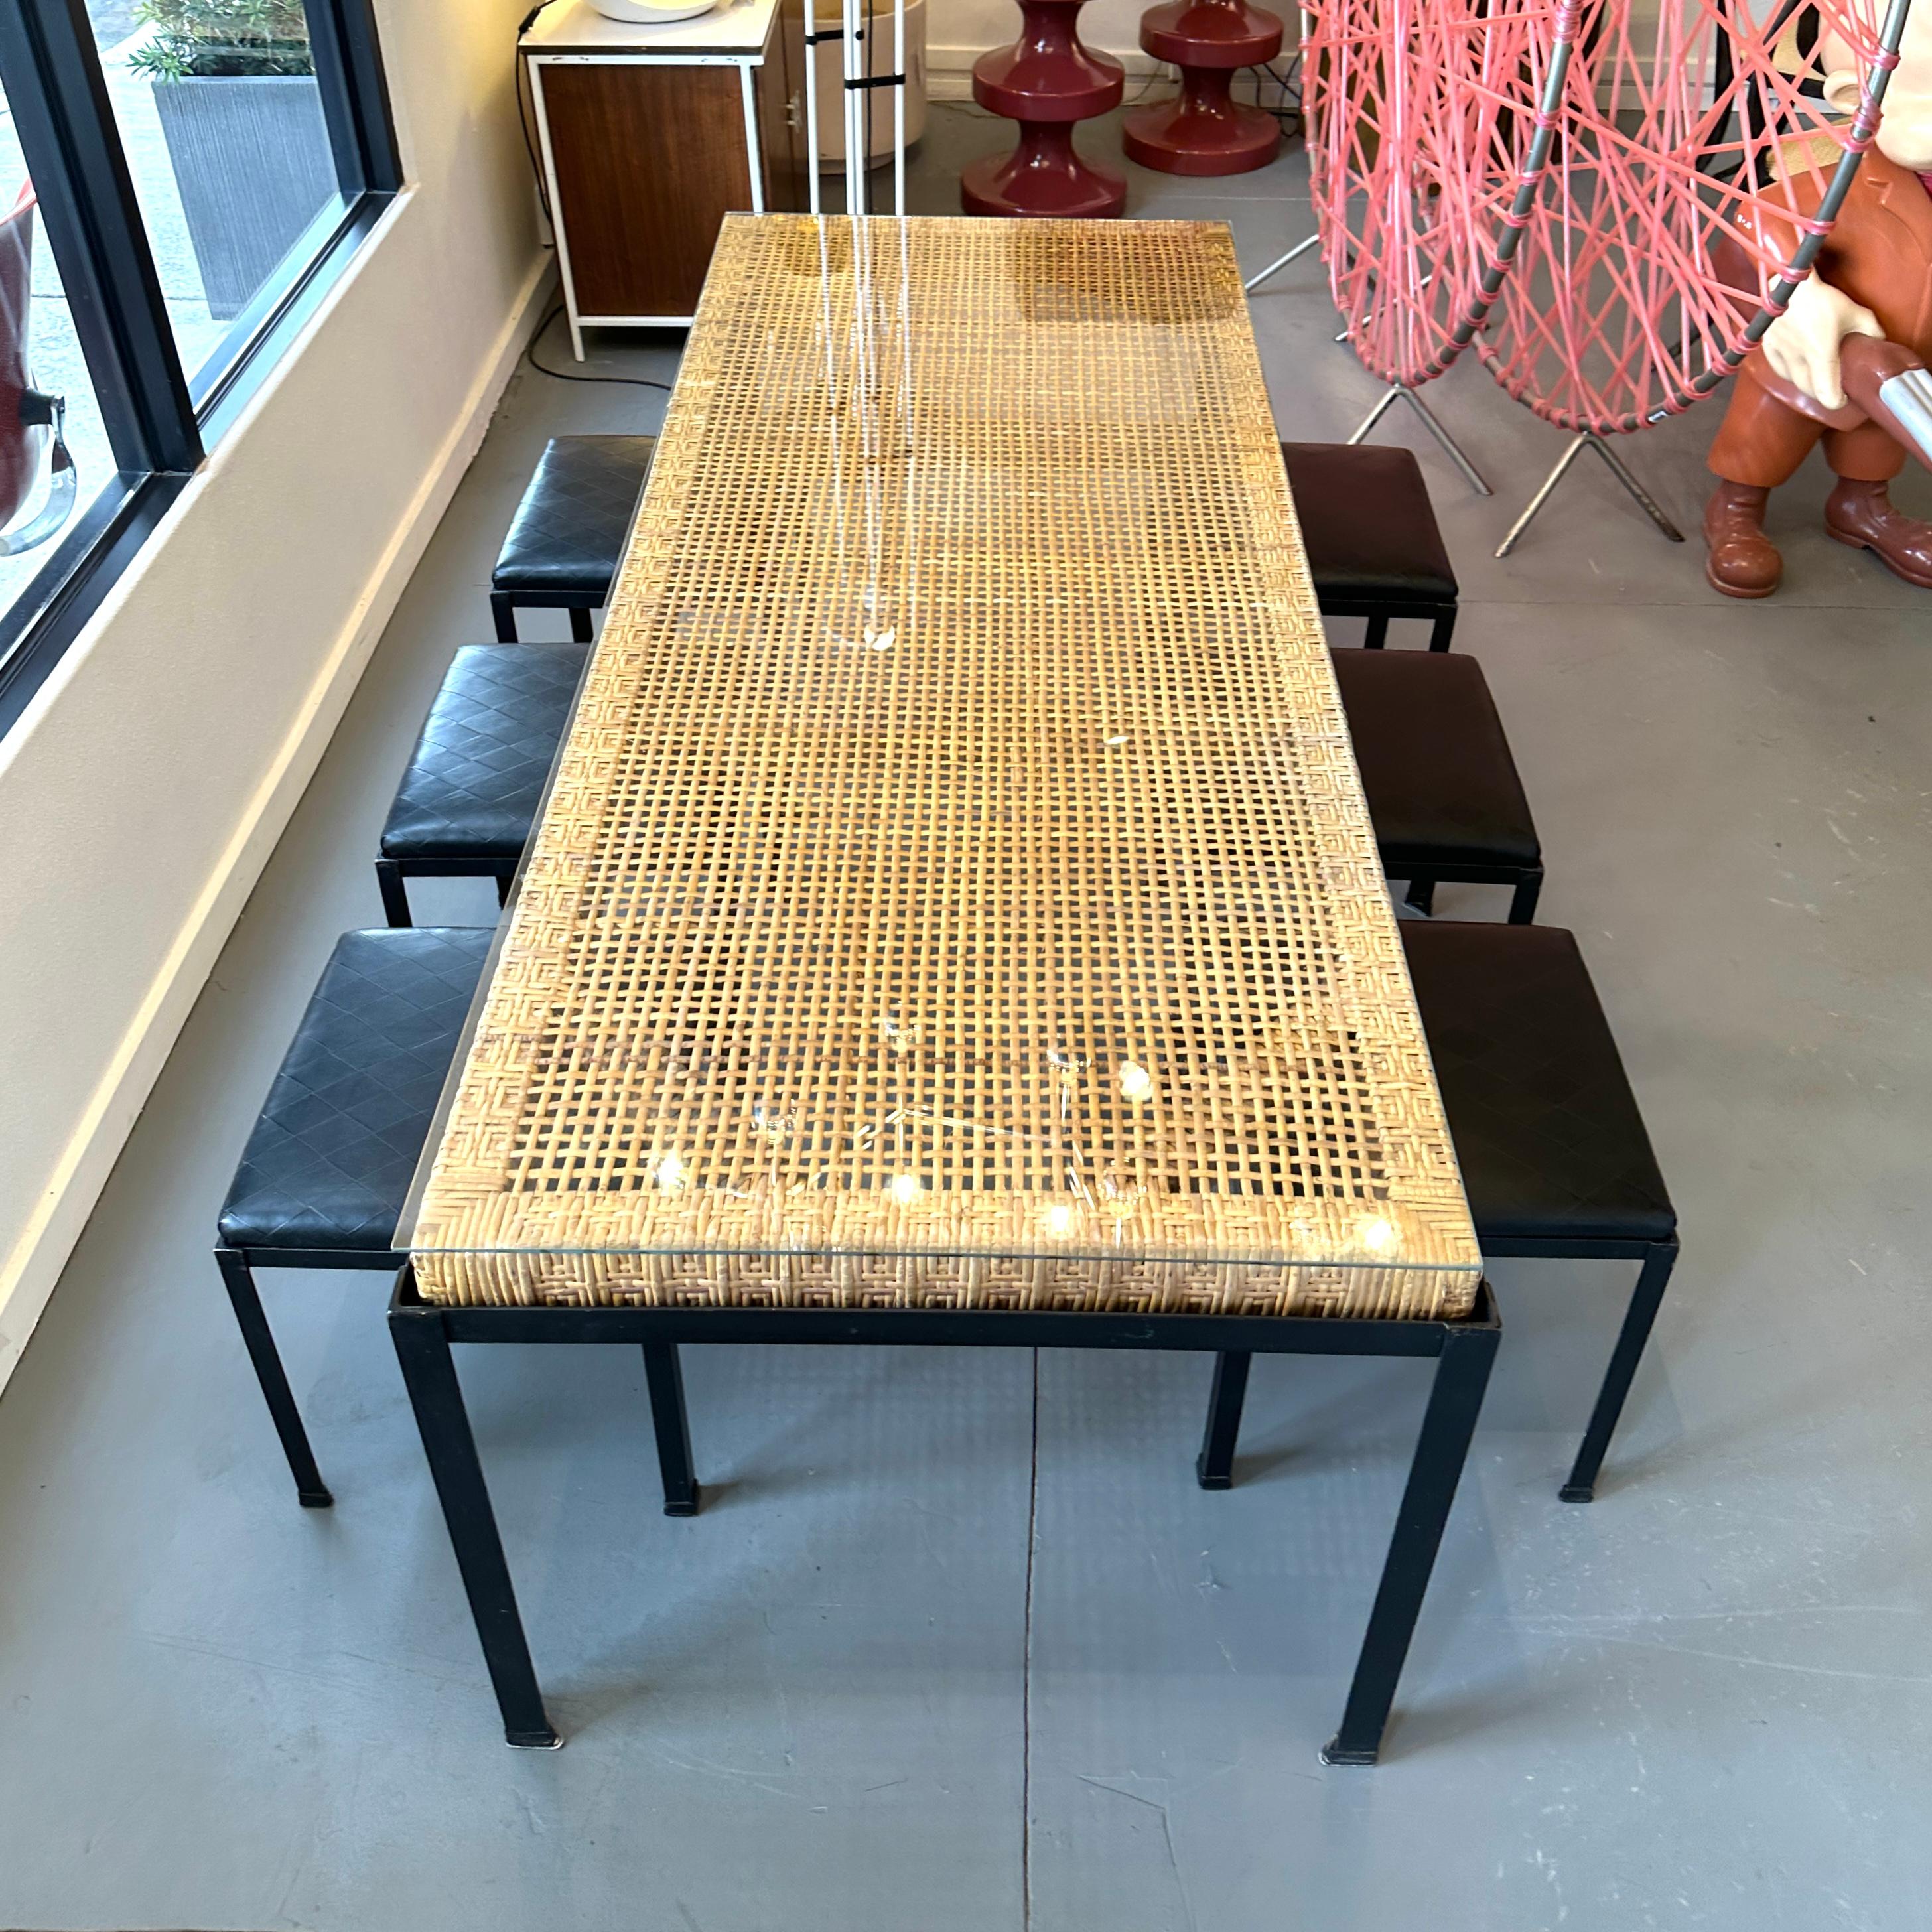 Painted Danny Ho Fong for Tropi-Cal Wicker and Iron Dining Table and Chairs, ca 1960s For Sale